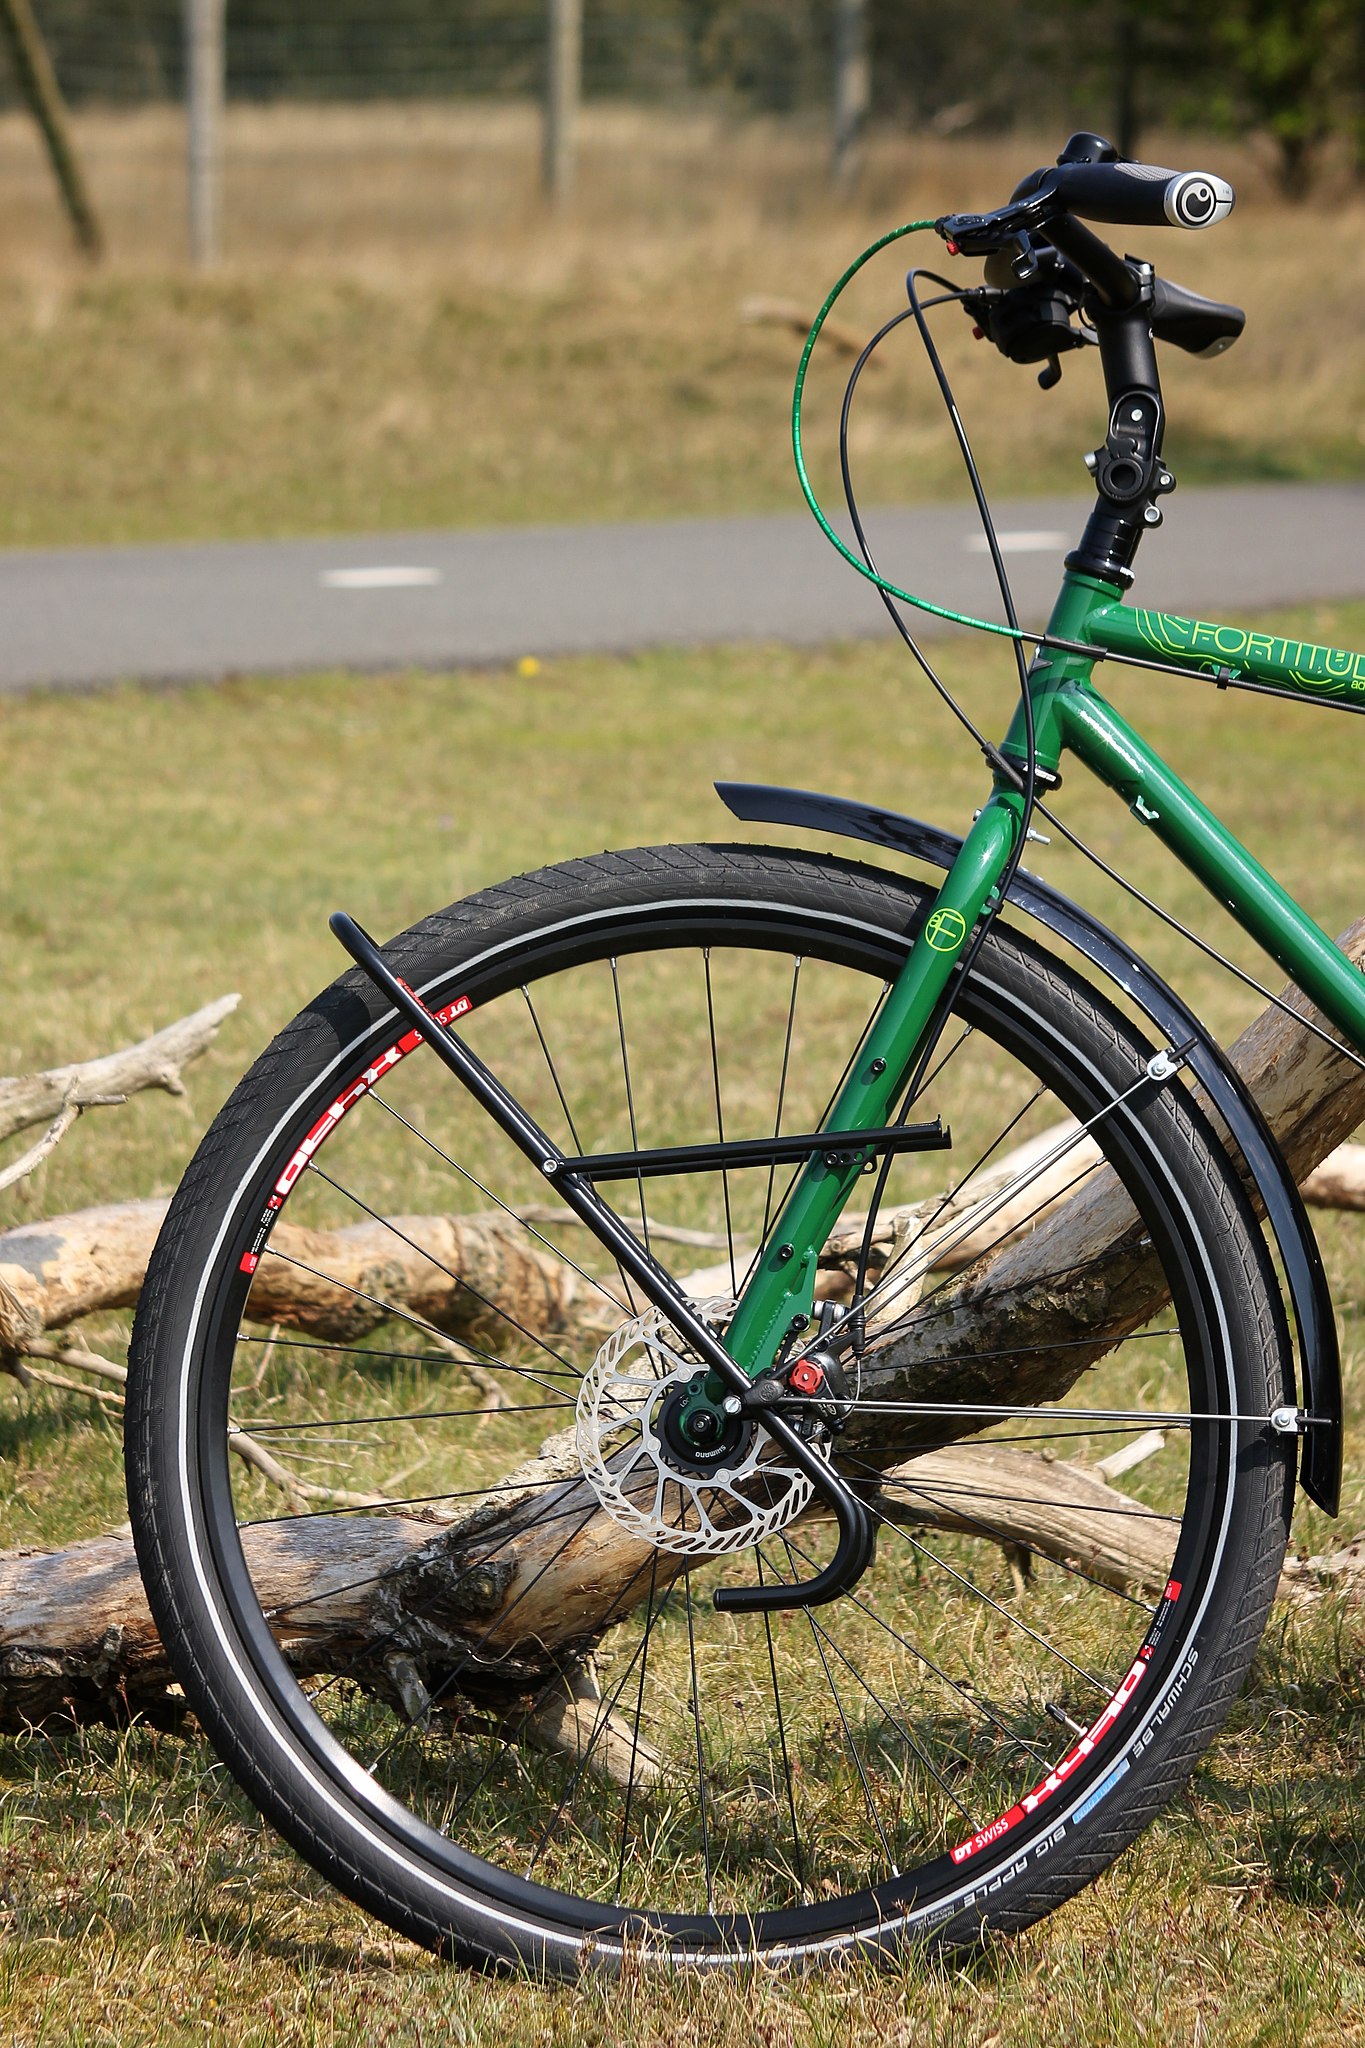 File:Tubus Tara lowrider luggage carrier on front fork of green bicycle.jpg -